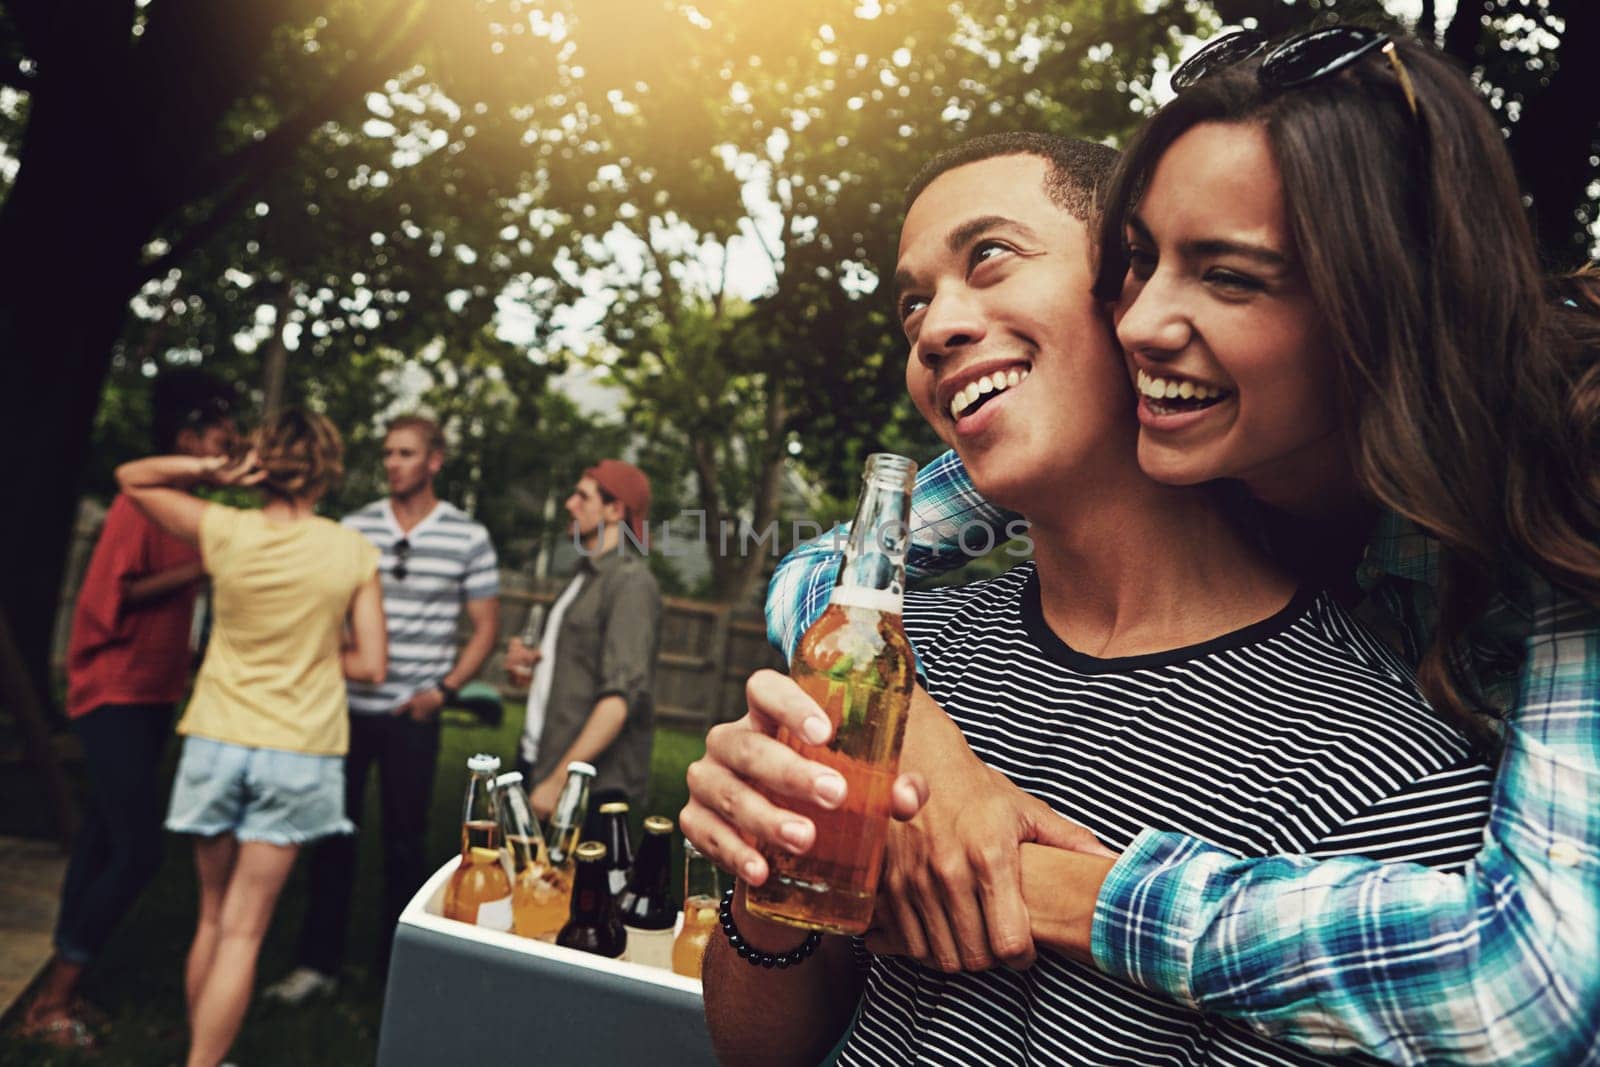 This is what summers all about. a young couple enjoying a party with friends outdoors